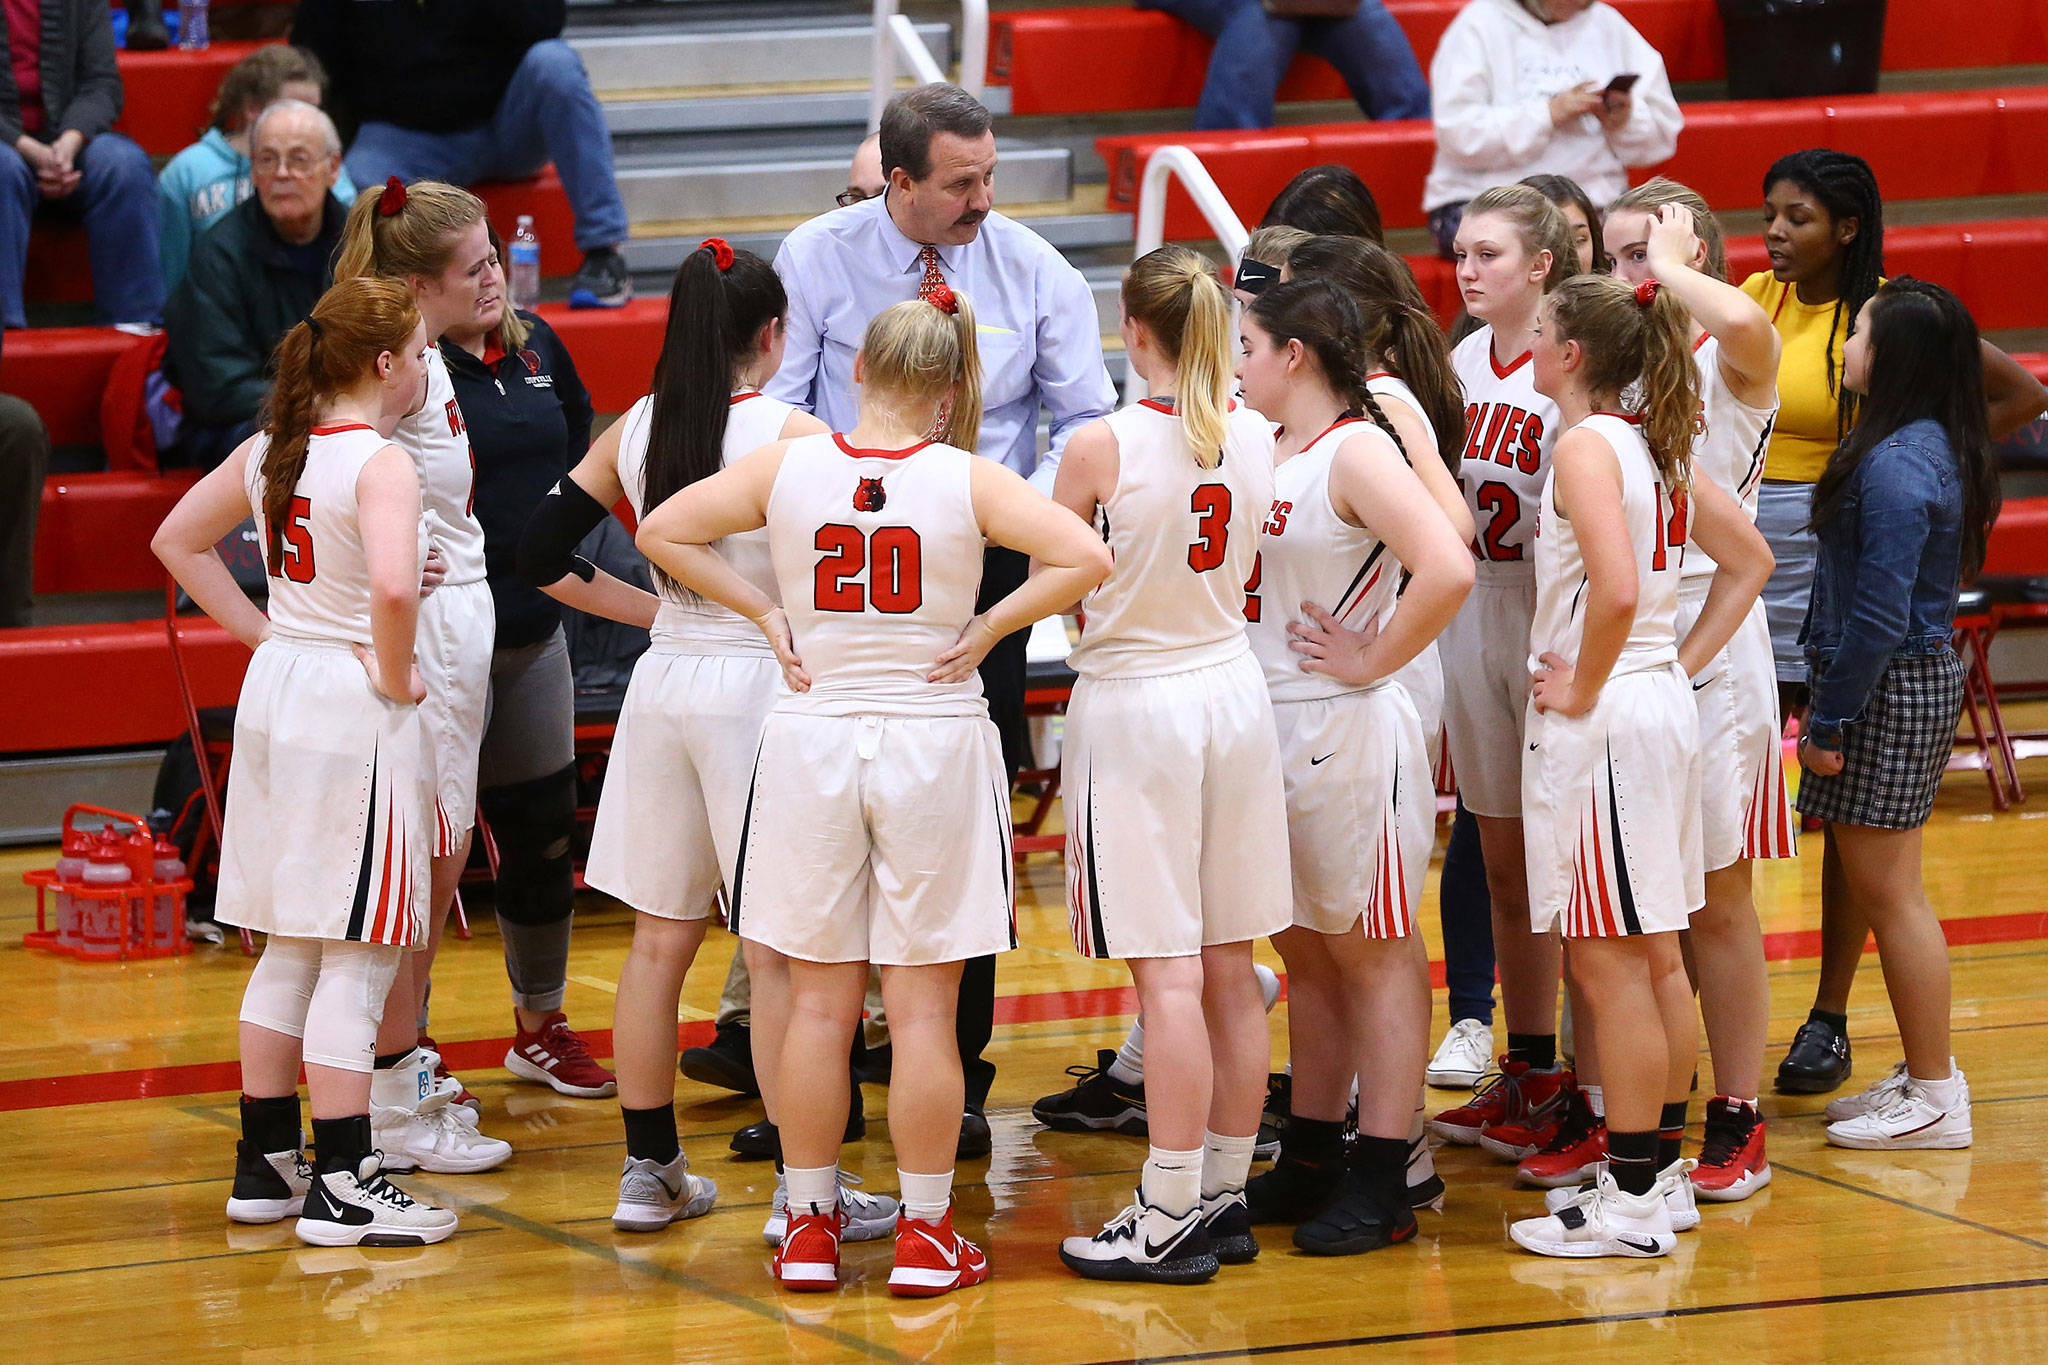 Coupeville coach Scott Fox addresses his team during a break in the South Whidbey game Tuesday.(Photo by John Fisken)